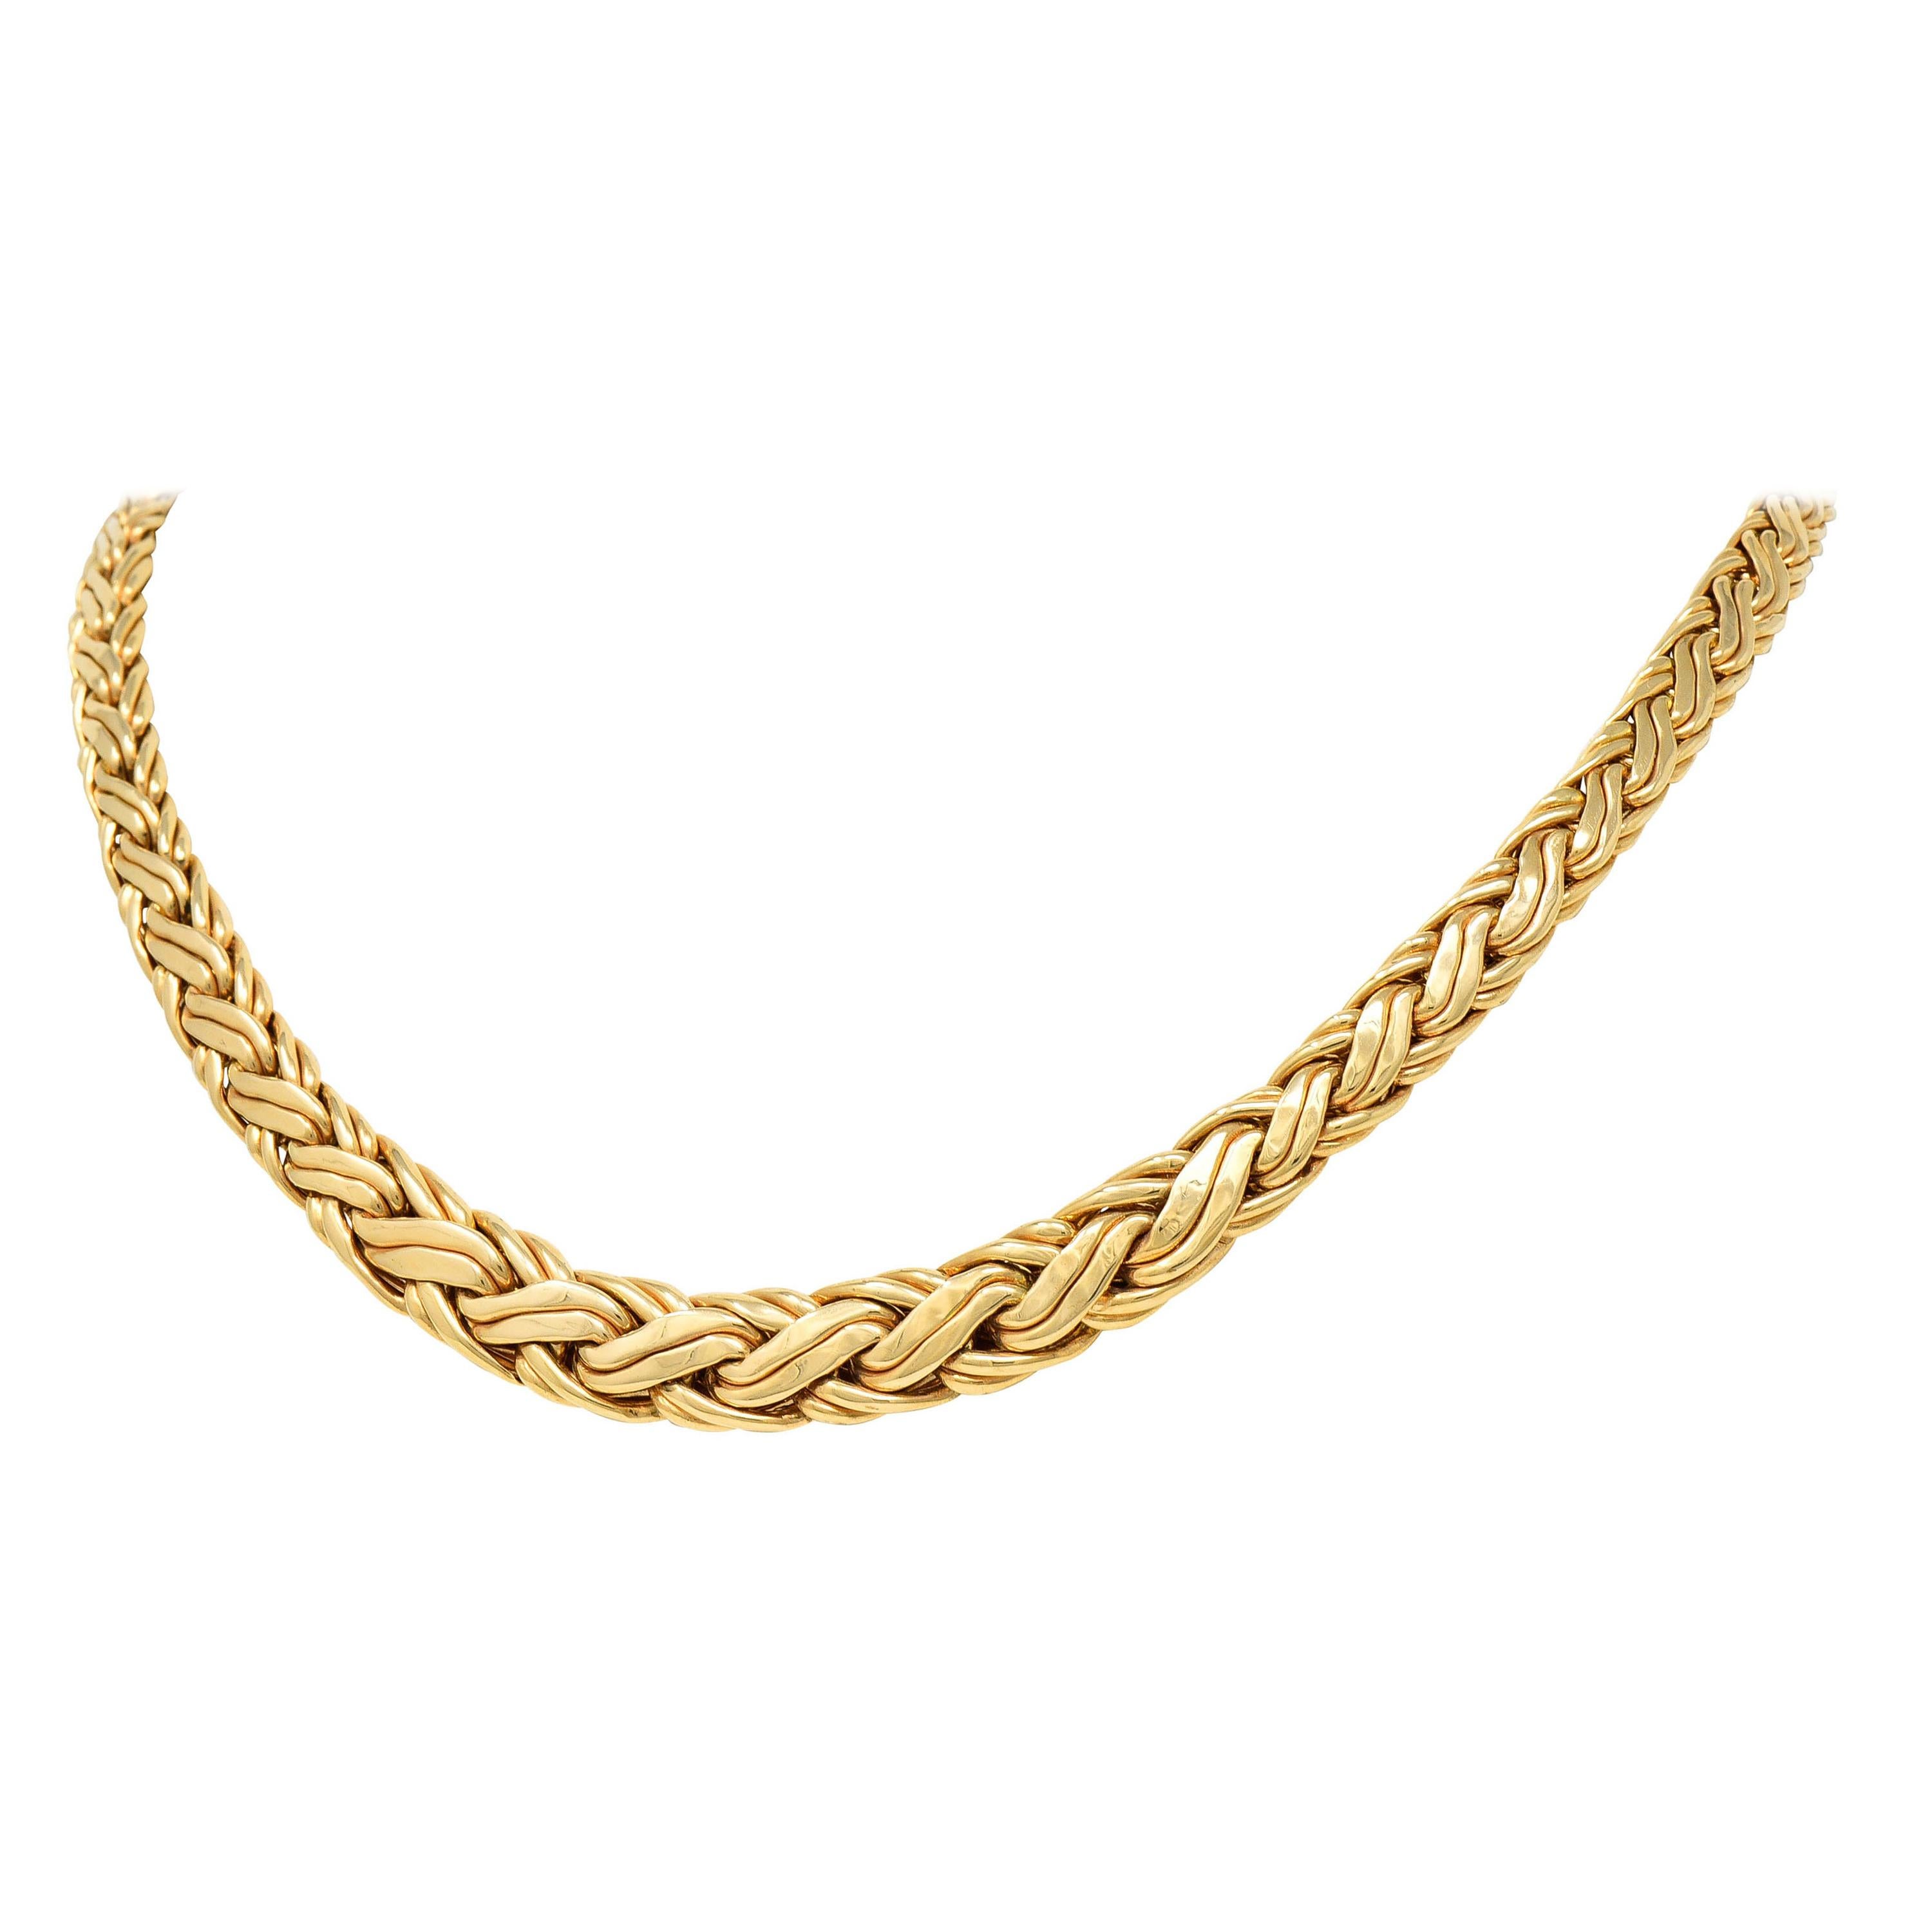 Tiffany & Co. Vintage 14 Karat Yellow Gold Wheat Chain Necklace